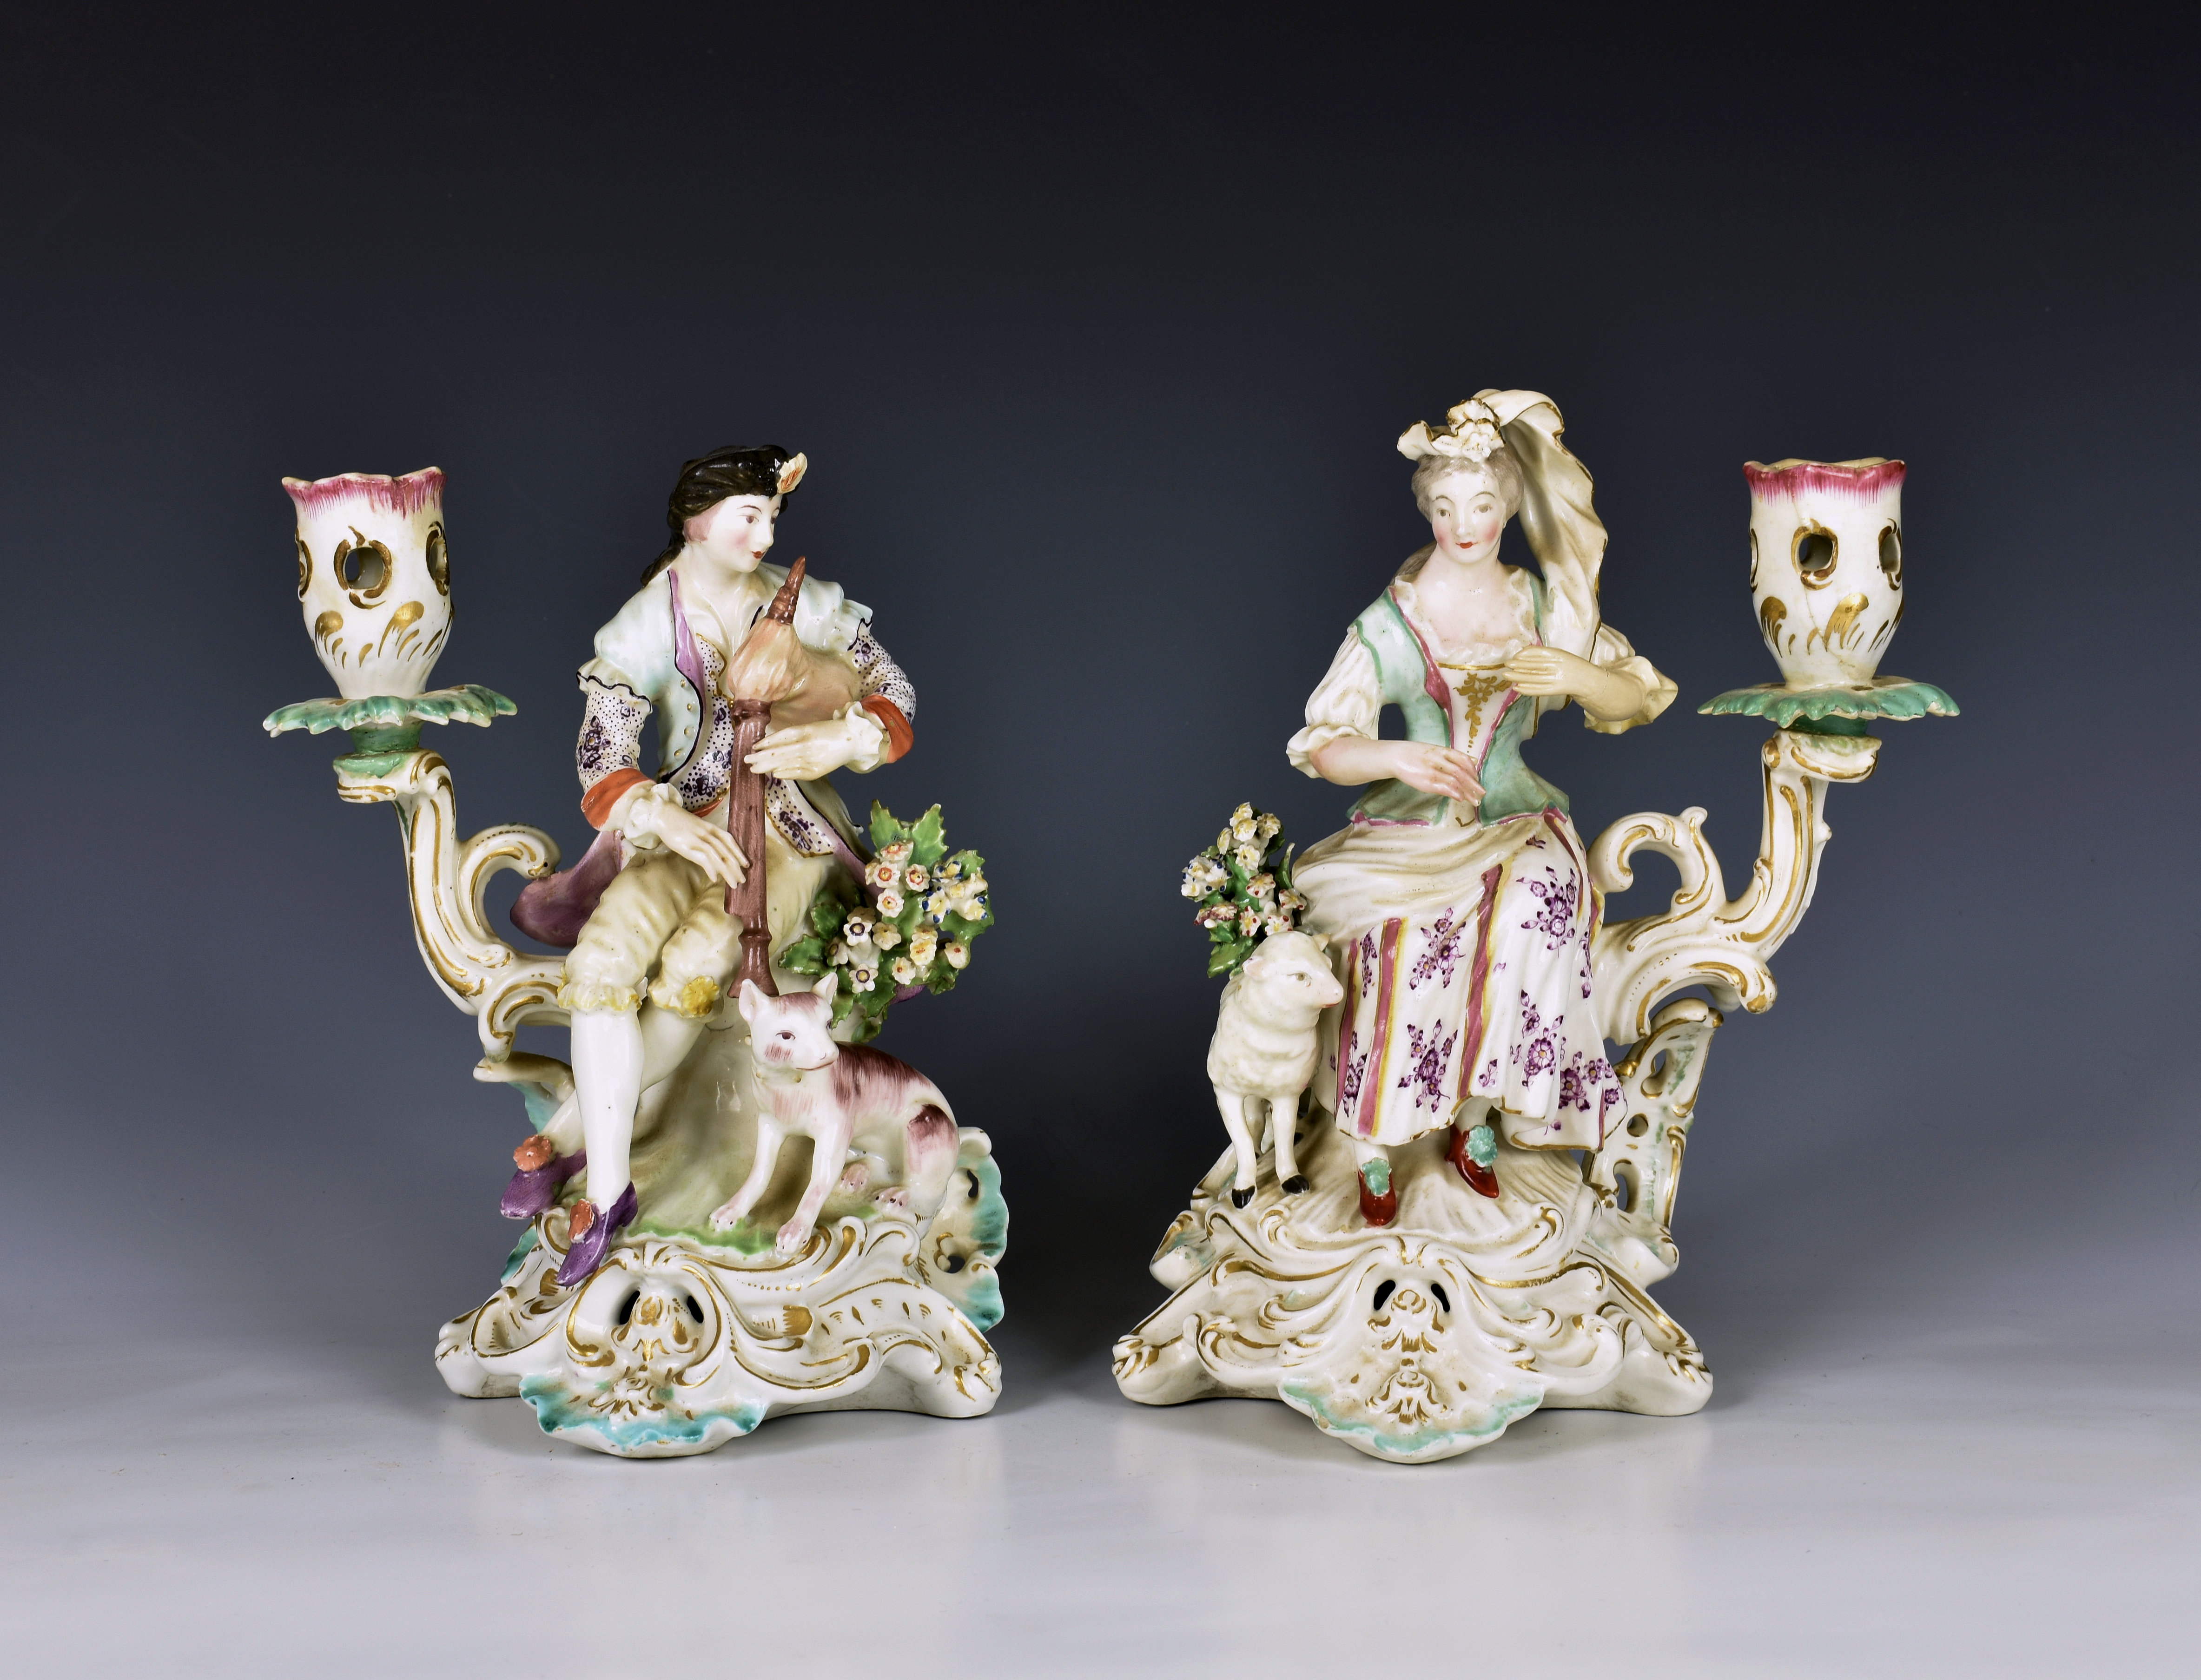 A pair of late 18th century Derby porcelain figural candlesticks the seated figures of a man playing